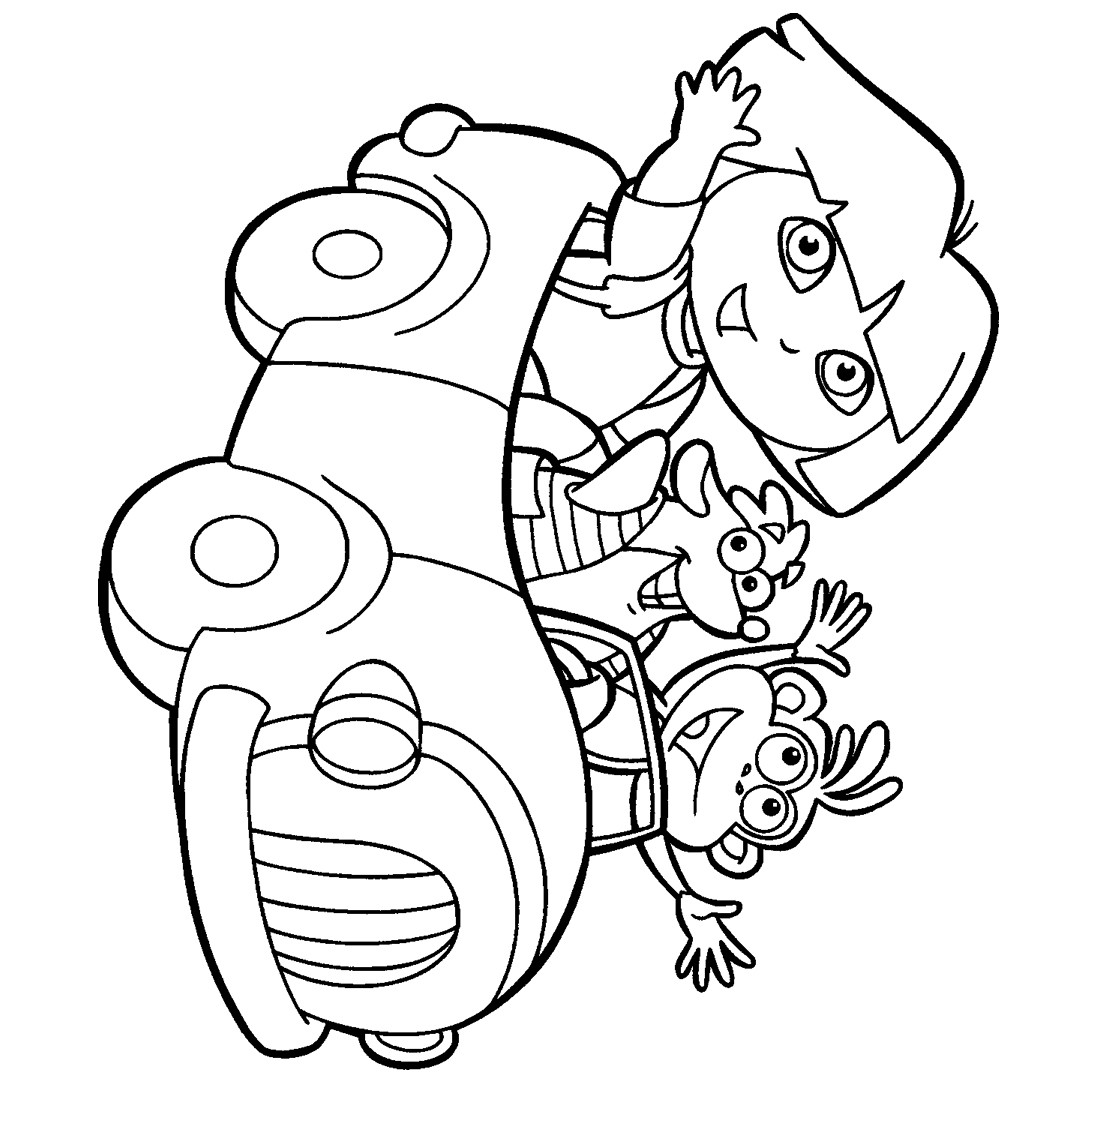 Coloring Worksheets For Kids
 Printable coloring pages for kids